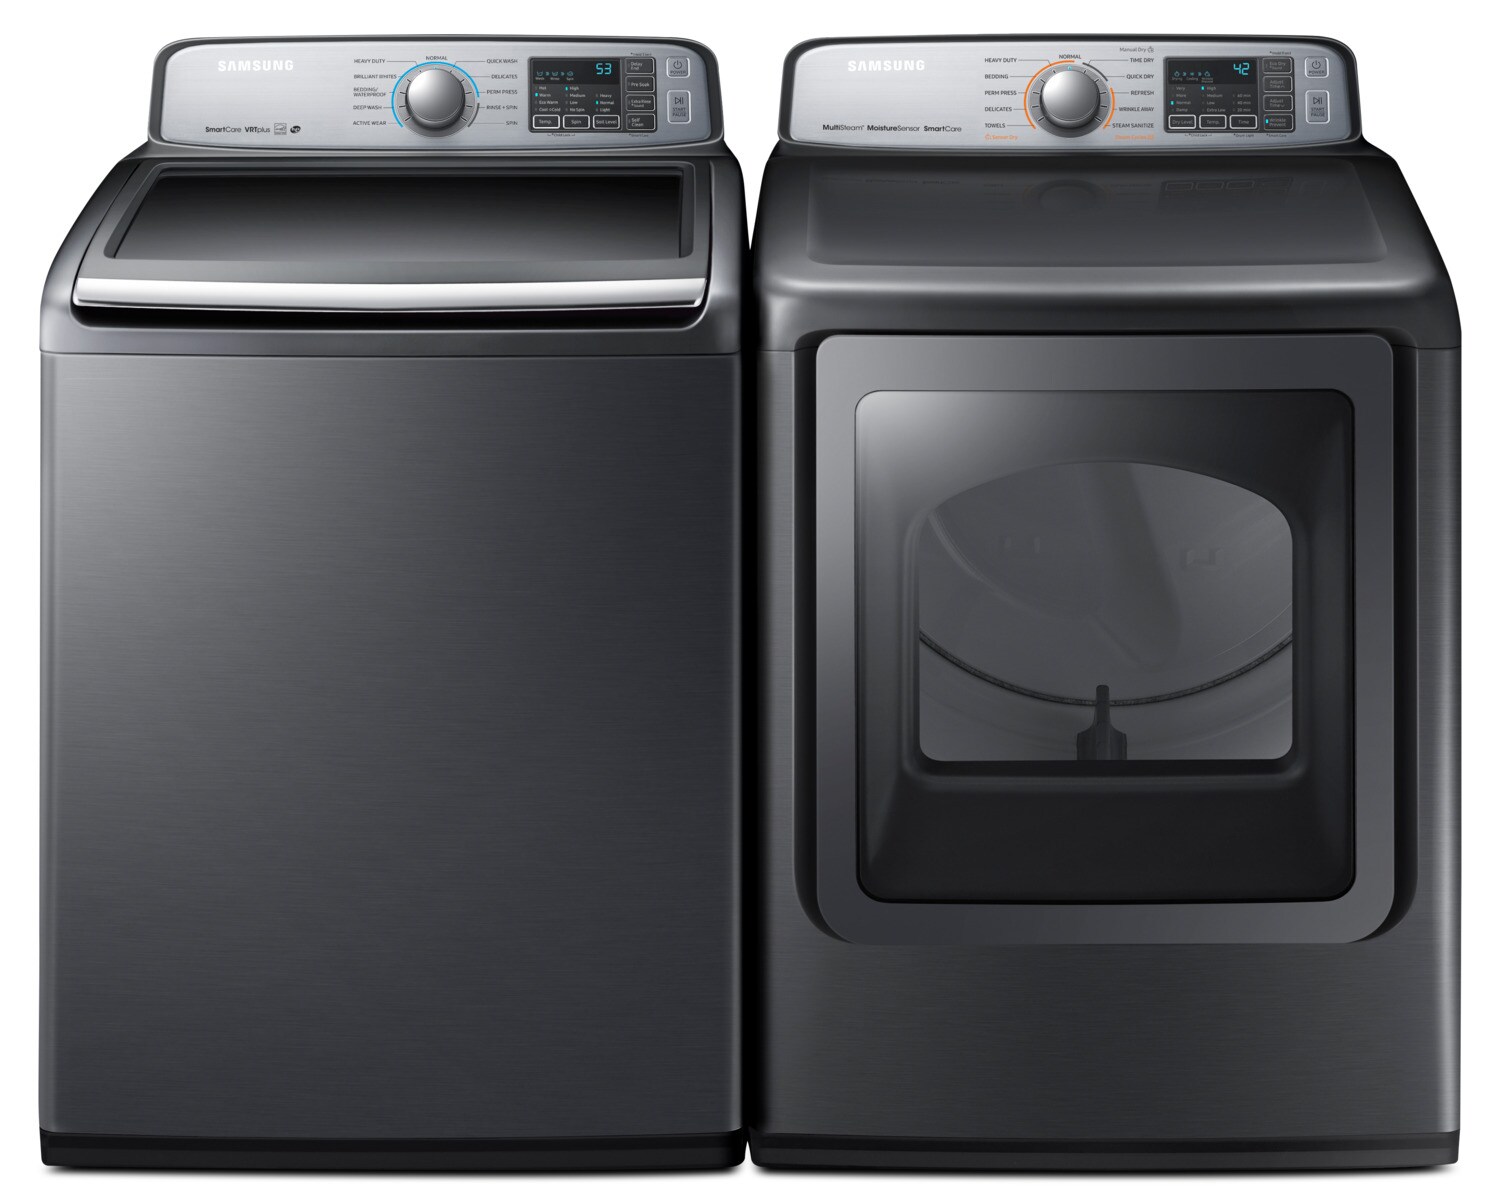 samsung-5-8-cu-ft-top-load-washer-and-7-4-cu-ft-multi-steam